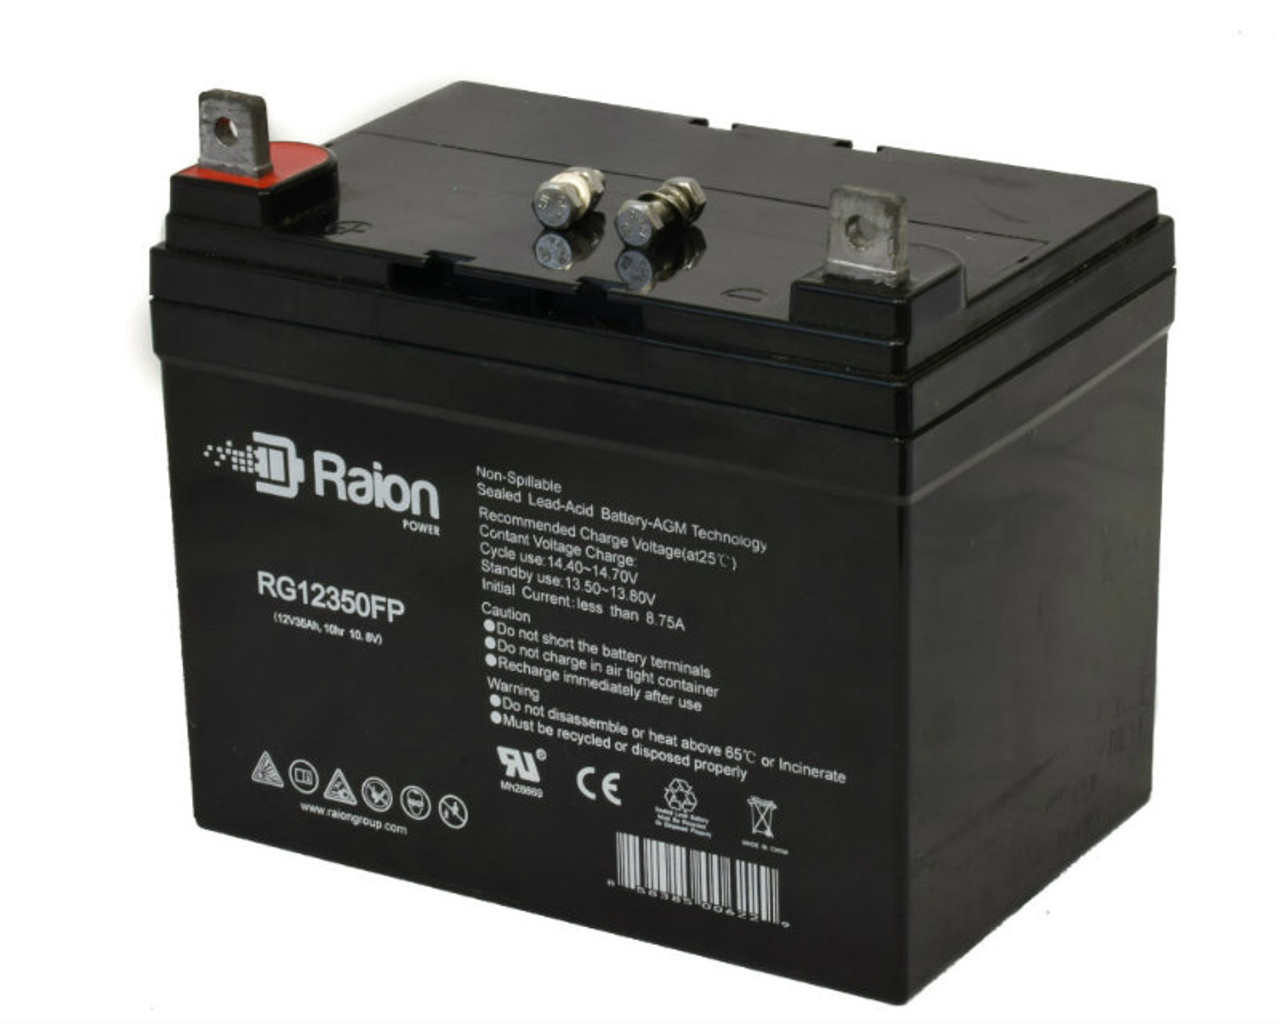 Raion Power Replacement 12V 35Ah RG12350FP Mobility Scooter Battery for A-BEC Suntech AGM1234T